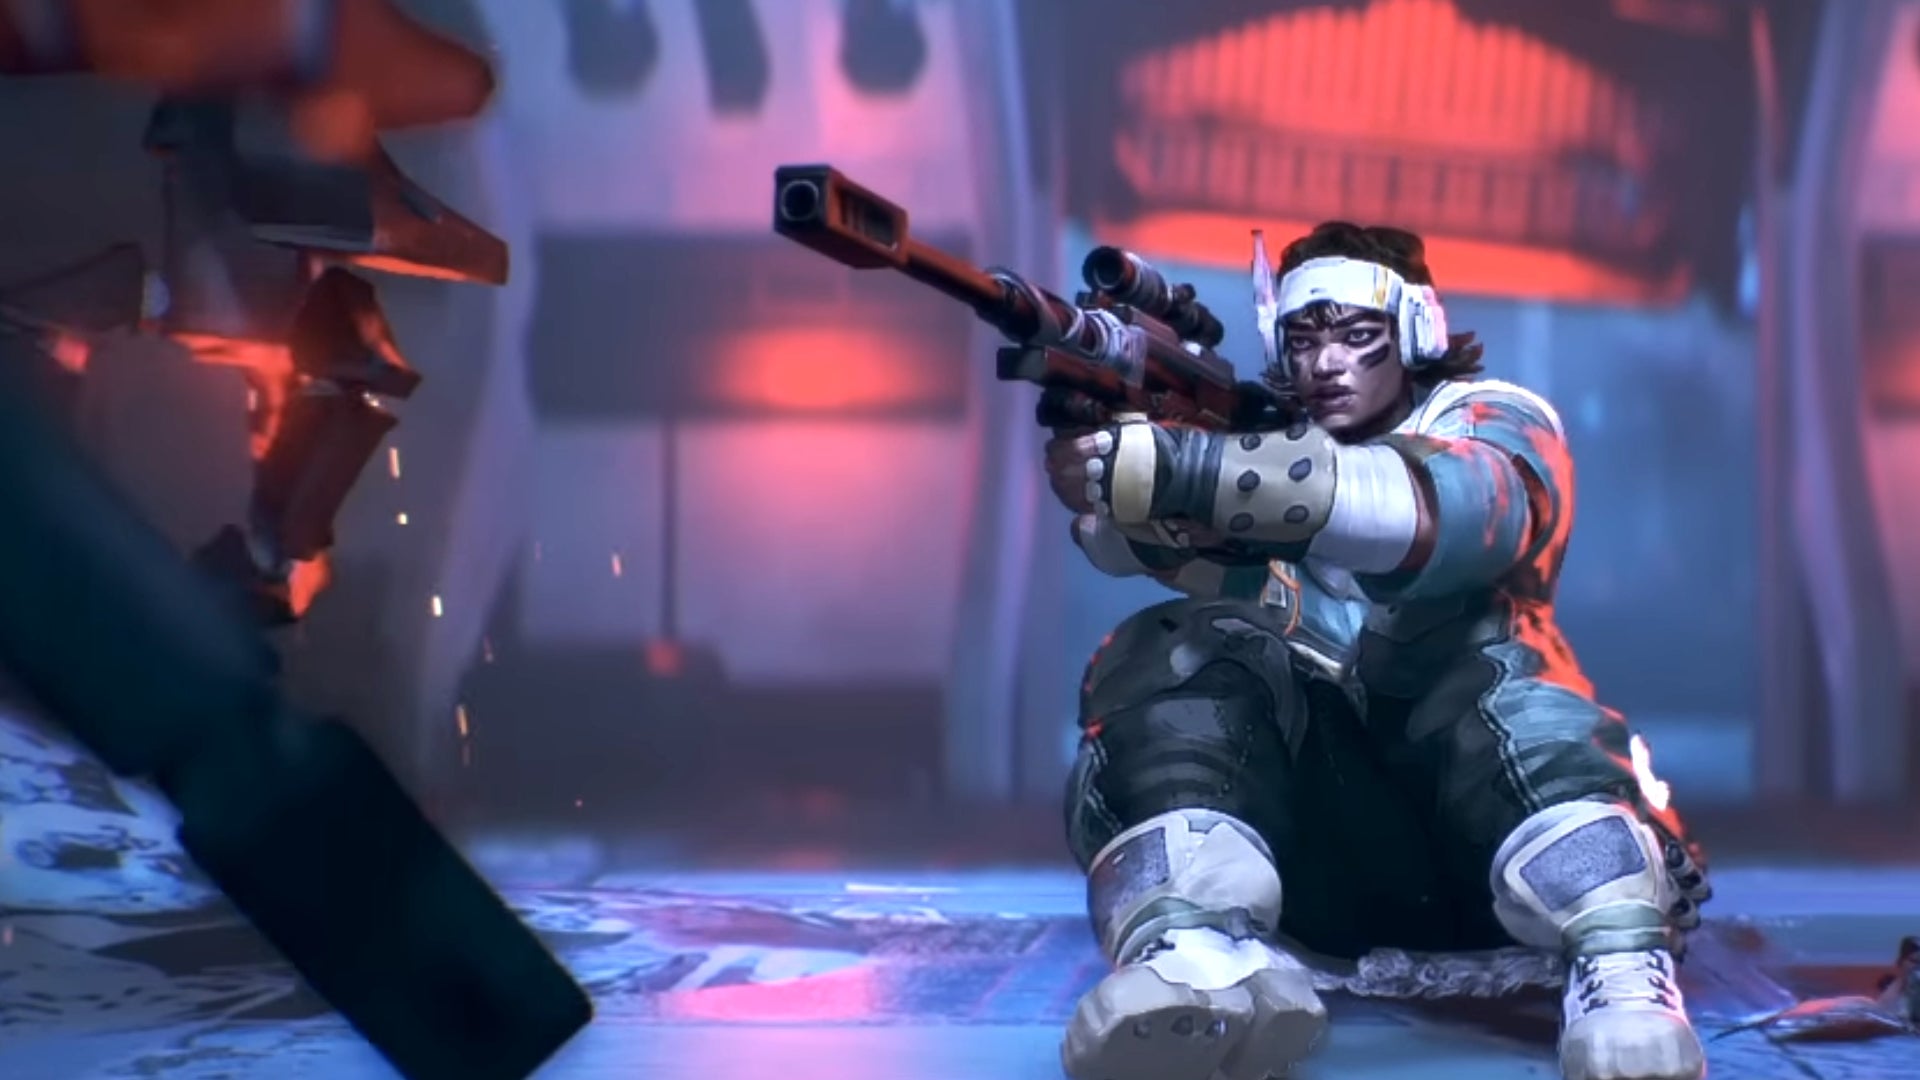 Apex Legends character Vantage sits on the floor and aims her sniper rifle at a mechanical arm attacking her in the Apex Legends Stories From The Outlands: Survive trailer.